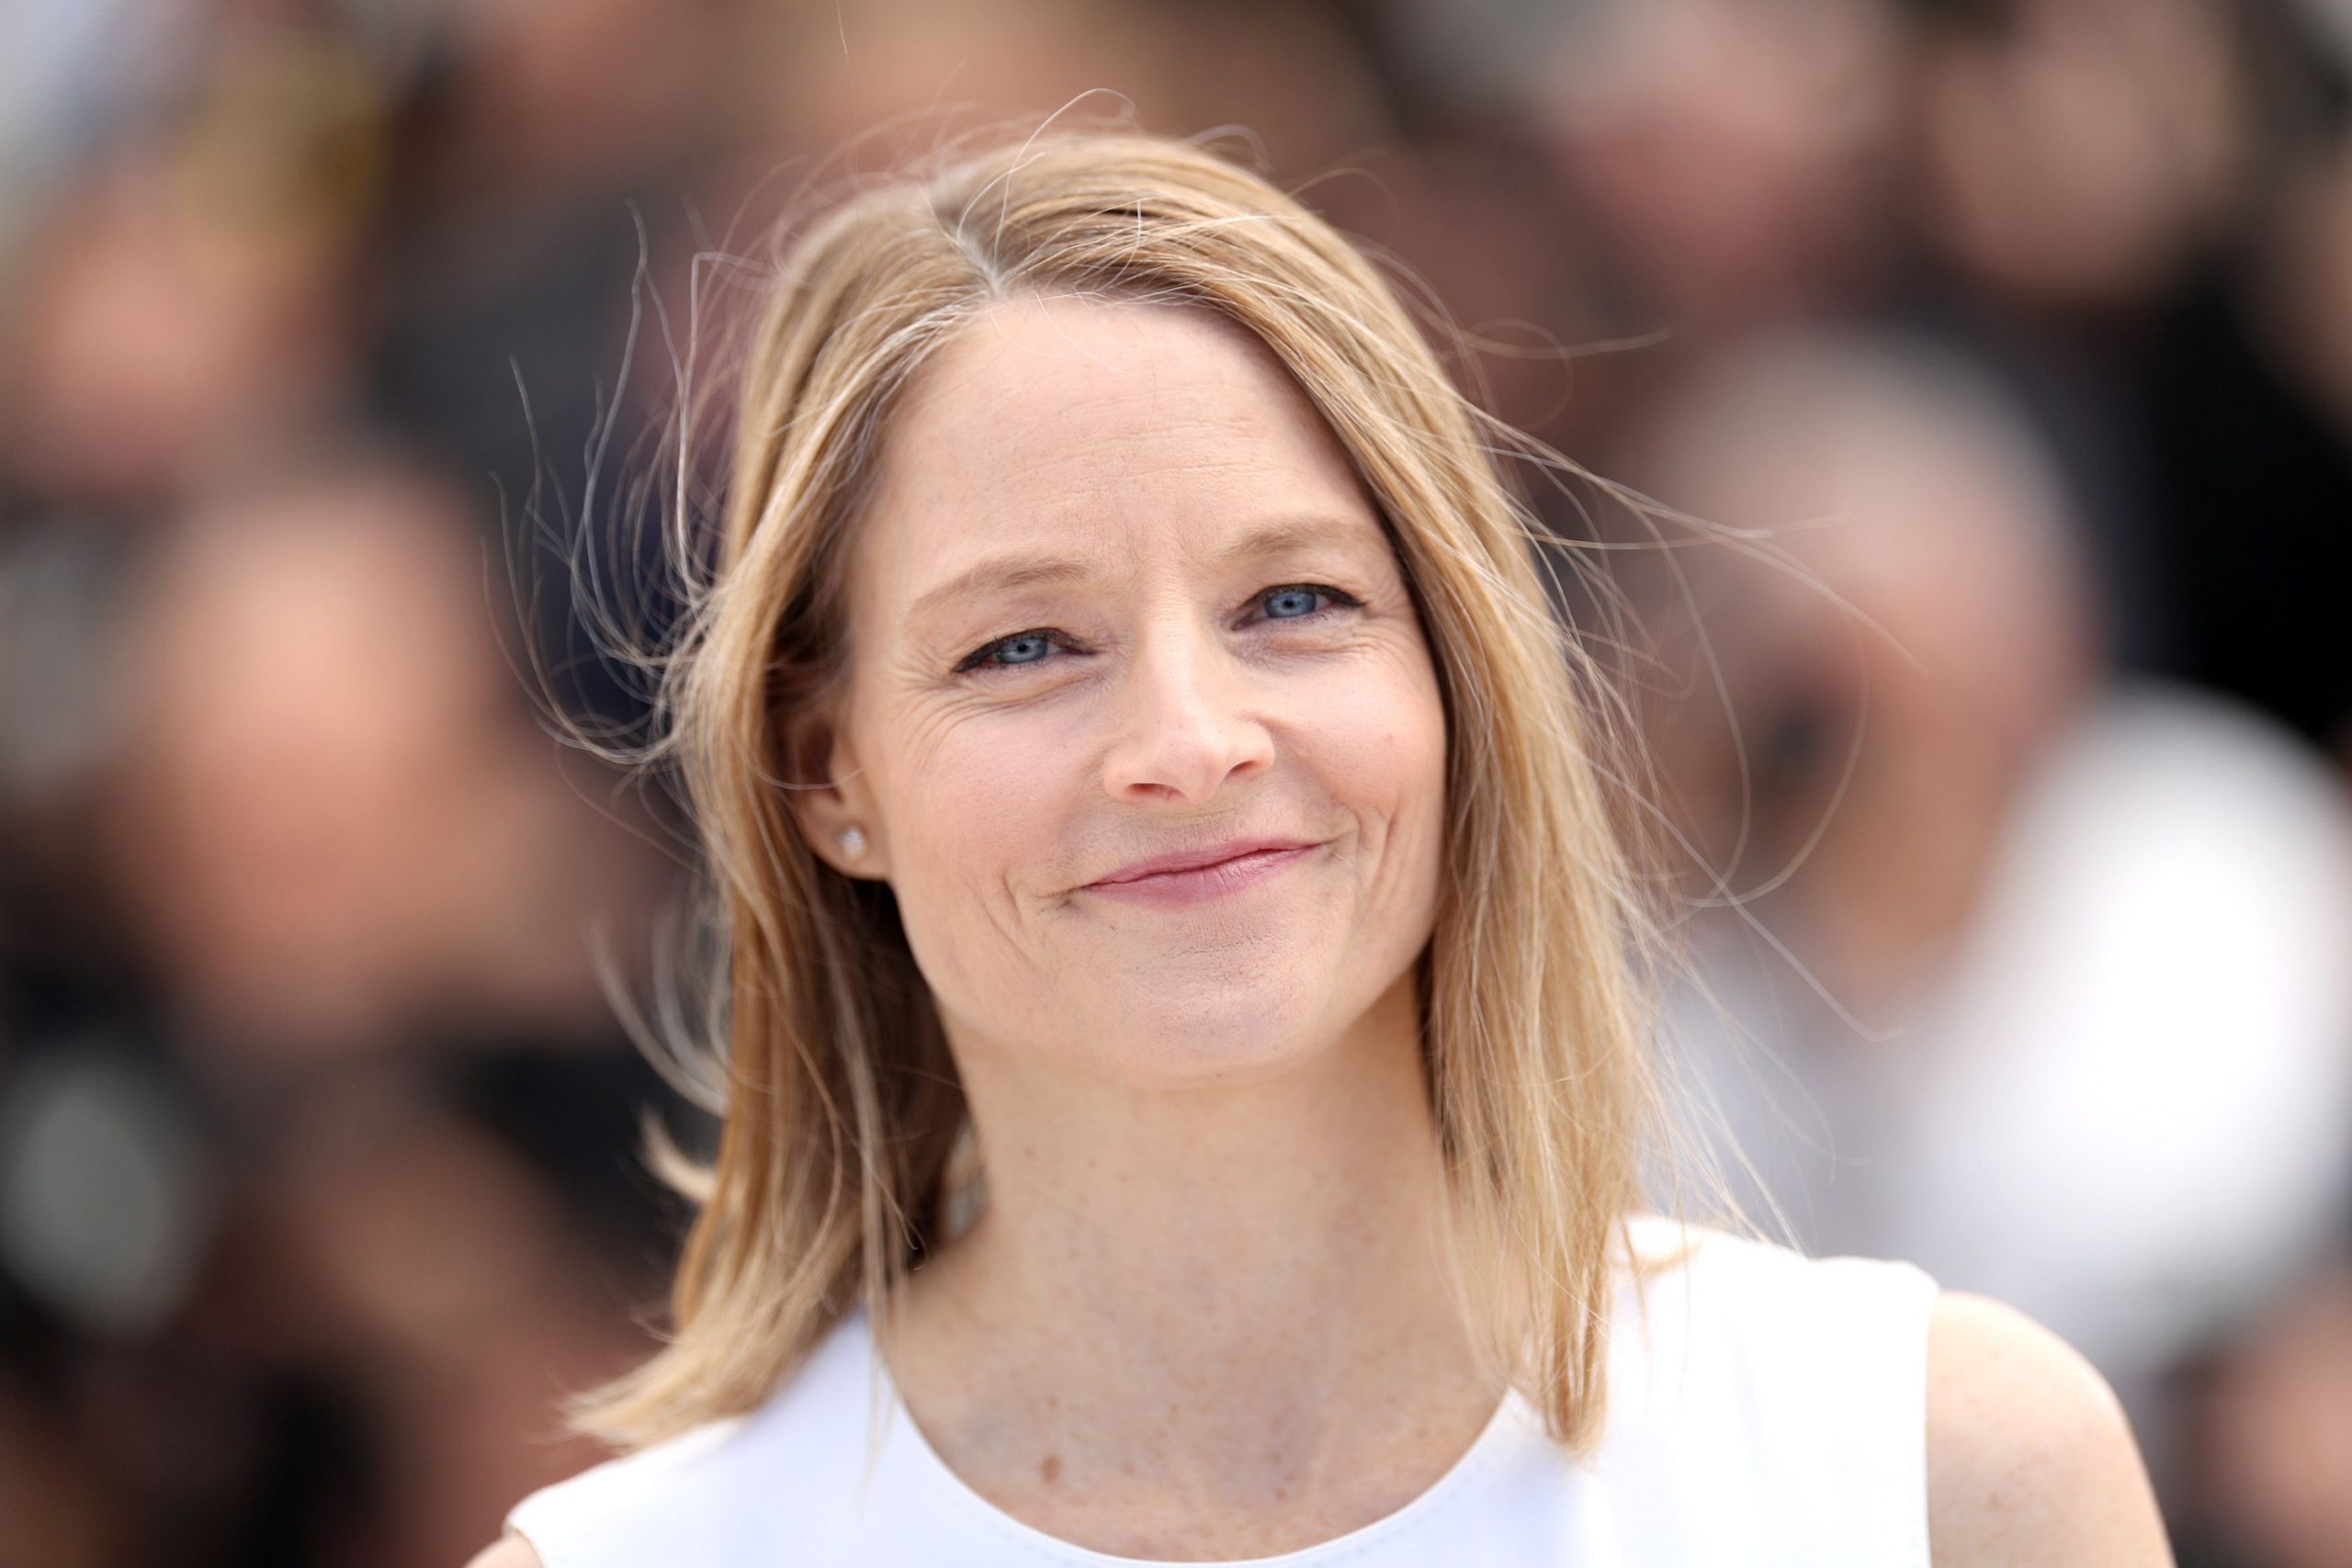 Top 10 Facts About Jodie Foster You Didn’t Know Before